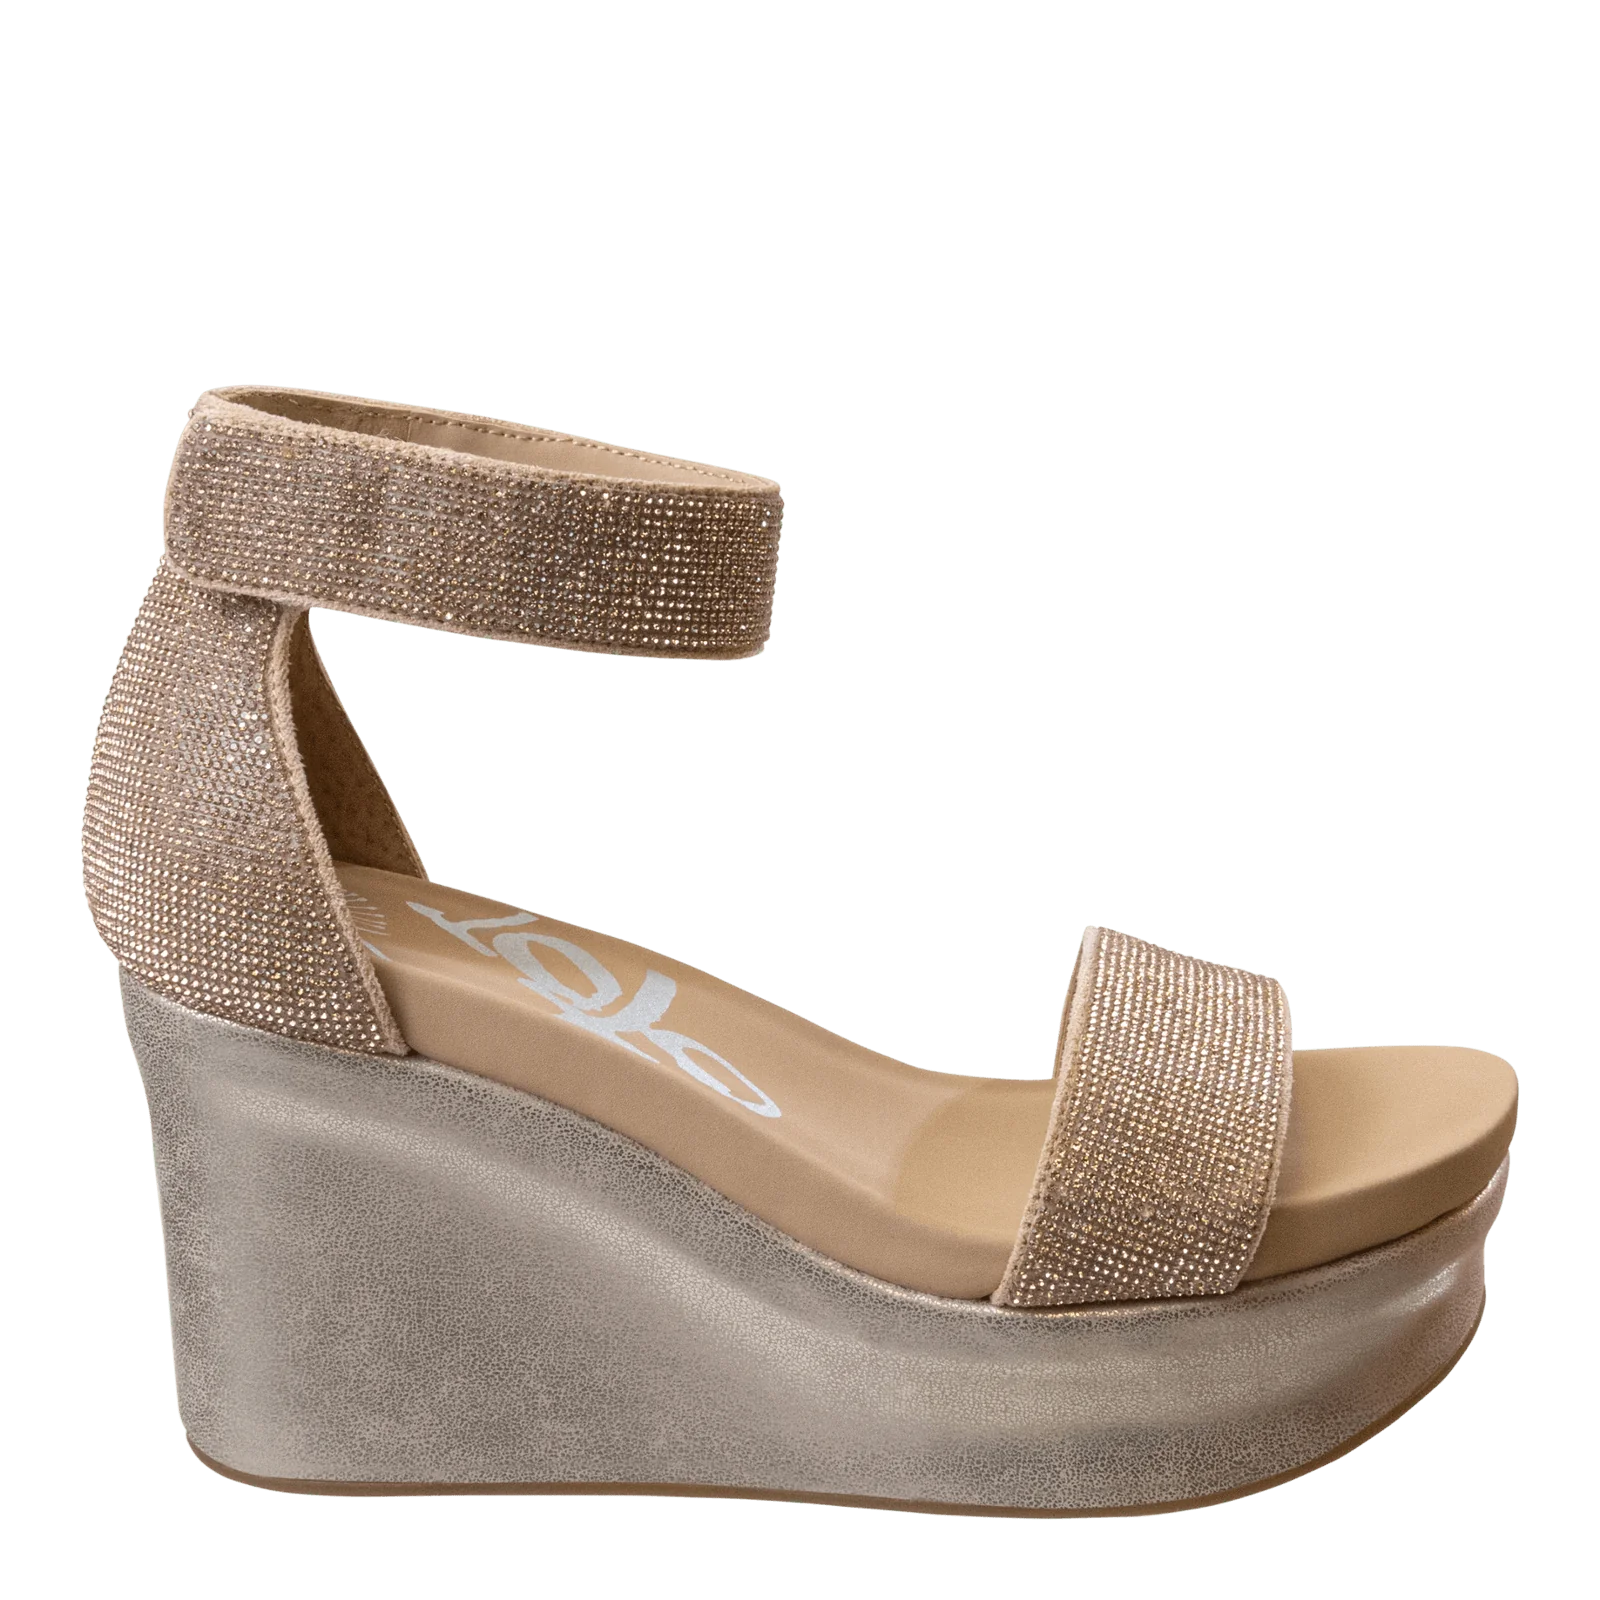 STATUS WEDGE SANDALS W ANKLE STRAP - ROSE GOLD